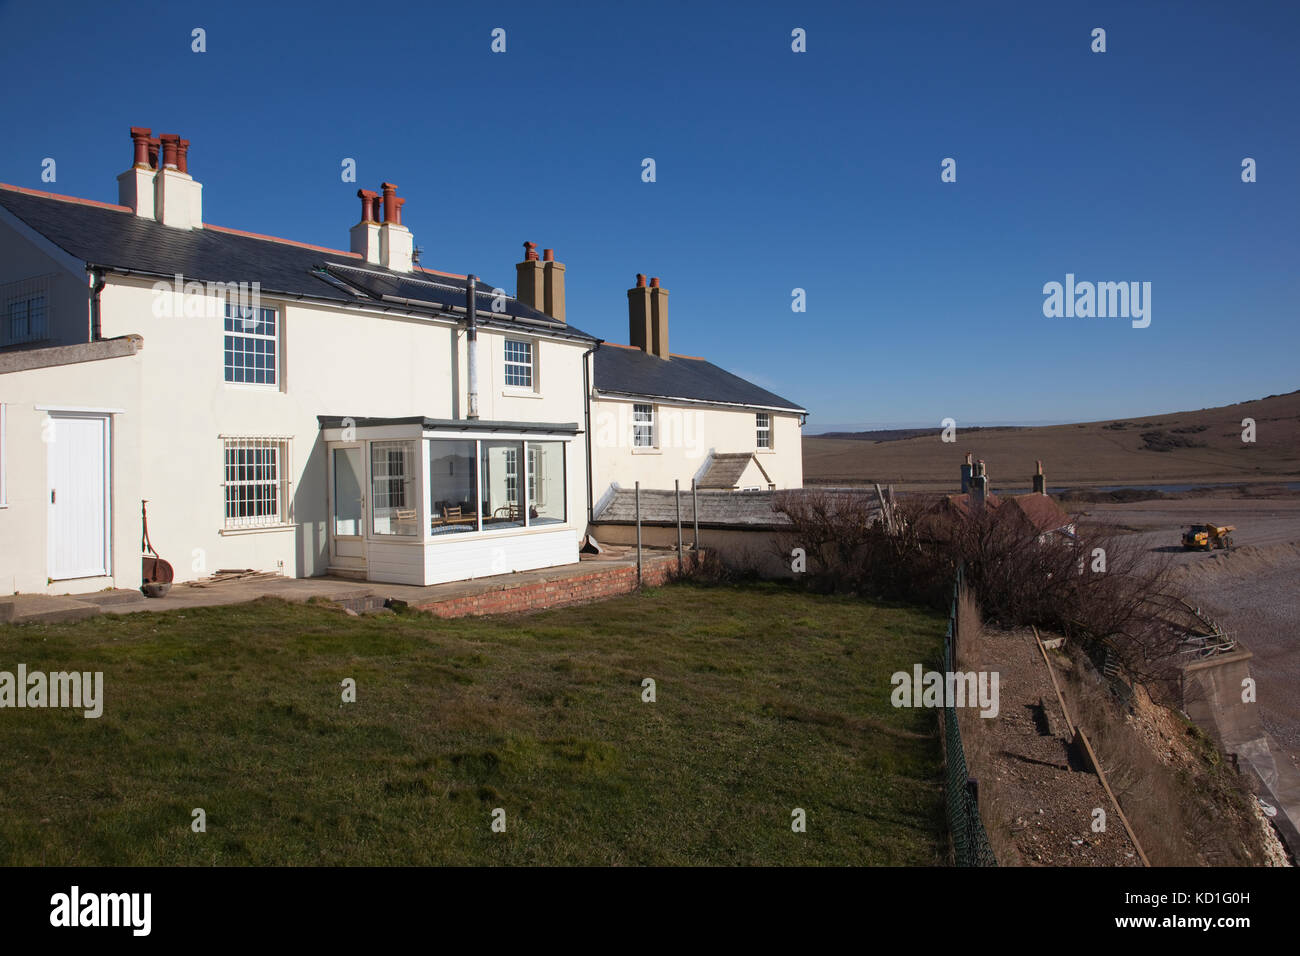 Coastguard cottages at Cuckmere Haven, Seaford, overlooking part of the Seven Sisters cliffs range, East Sussex, England, UK Stock Photo